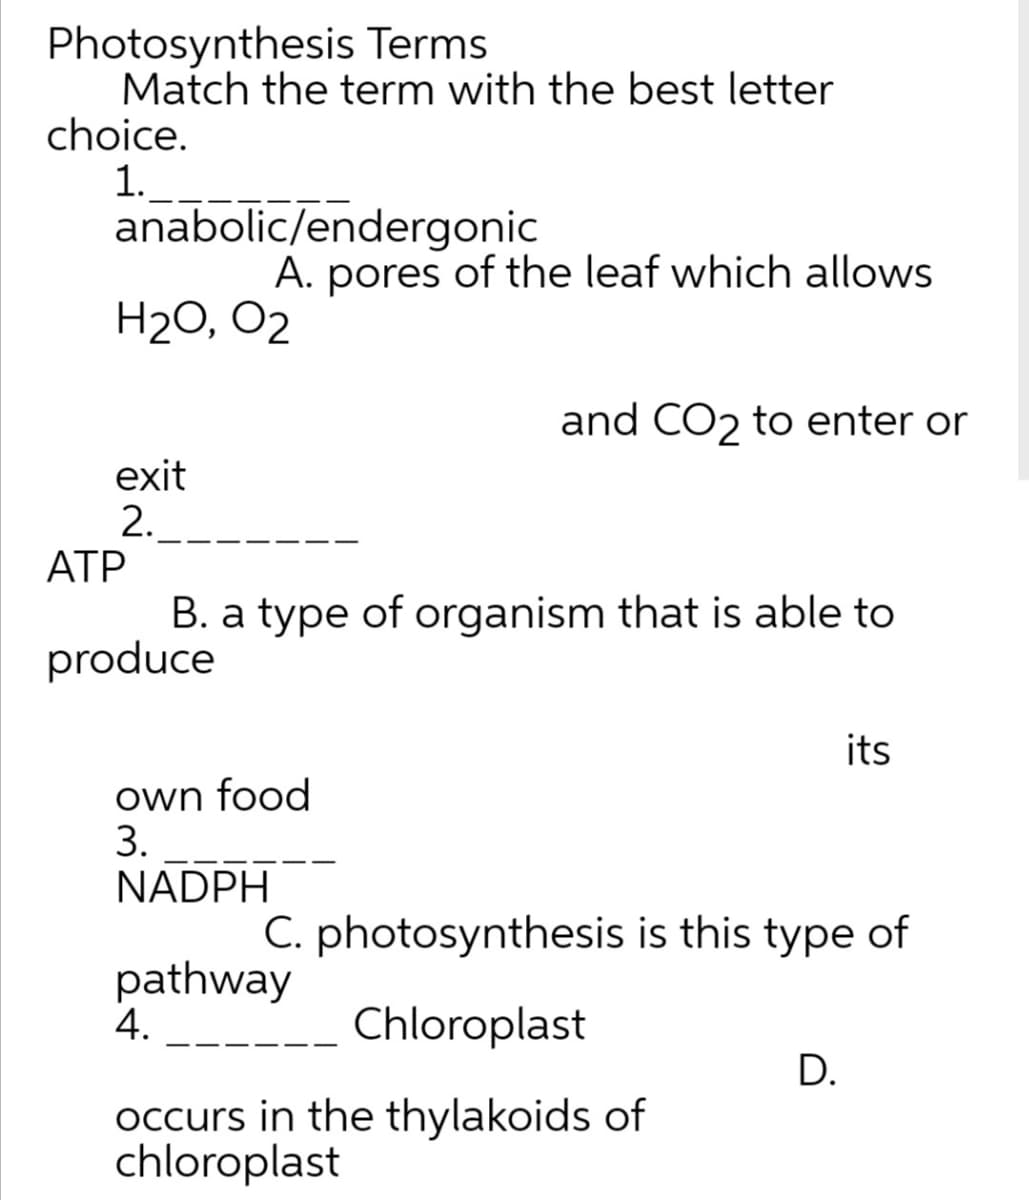 Photosynthesis Terms
Match the term with the best letter
choice.
1.
anabolic/endergonic
A. pores of the leaf which allows
H2O, O2
and CO2 to enter or
exit
2.
АТР
B. a type of organism that is able to
produce
its
own food
3.
NADPH
C. photosynthesis is this type of
pathway
4.
Chloroplast
D.
occurs in the thylakoids of
chloroplast
